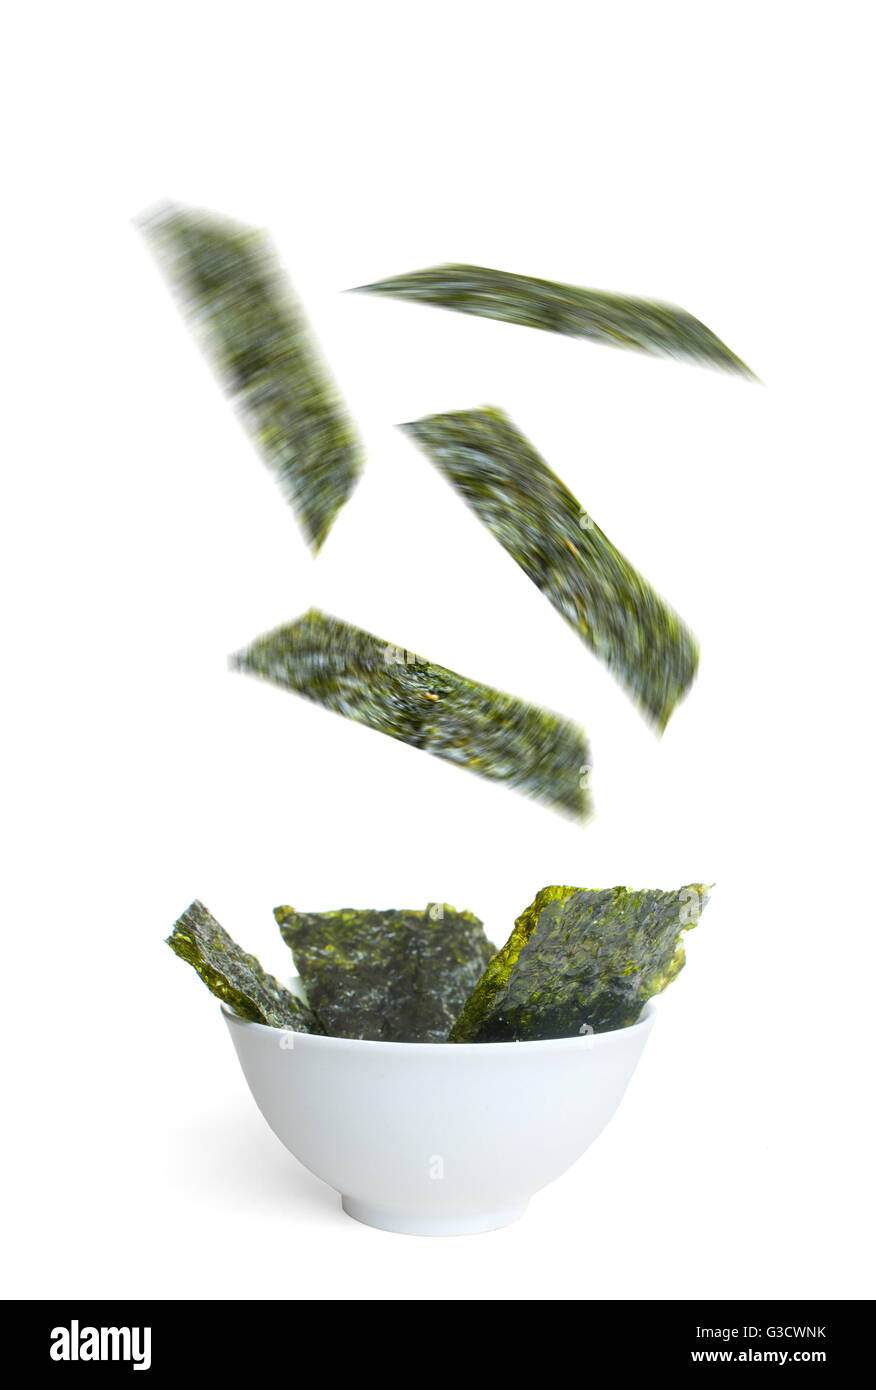 Seaweed slices falling into a bowl over a white background, a superfood that is high in vitamin c, iron and promotes healthy bac Stock Photo